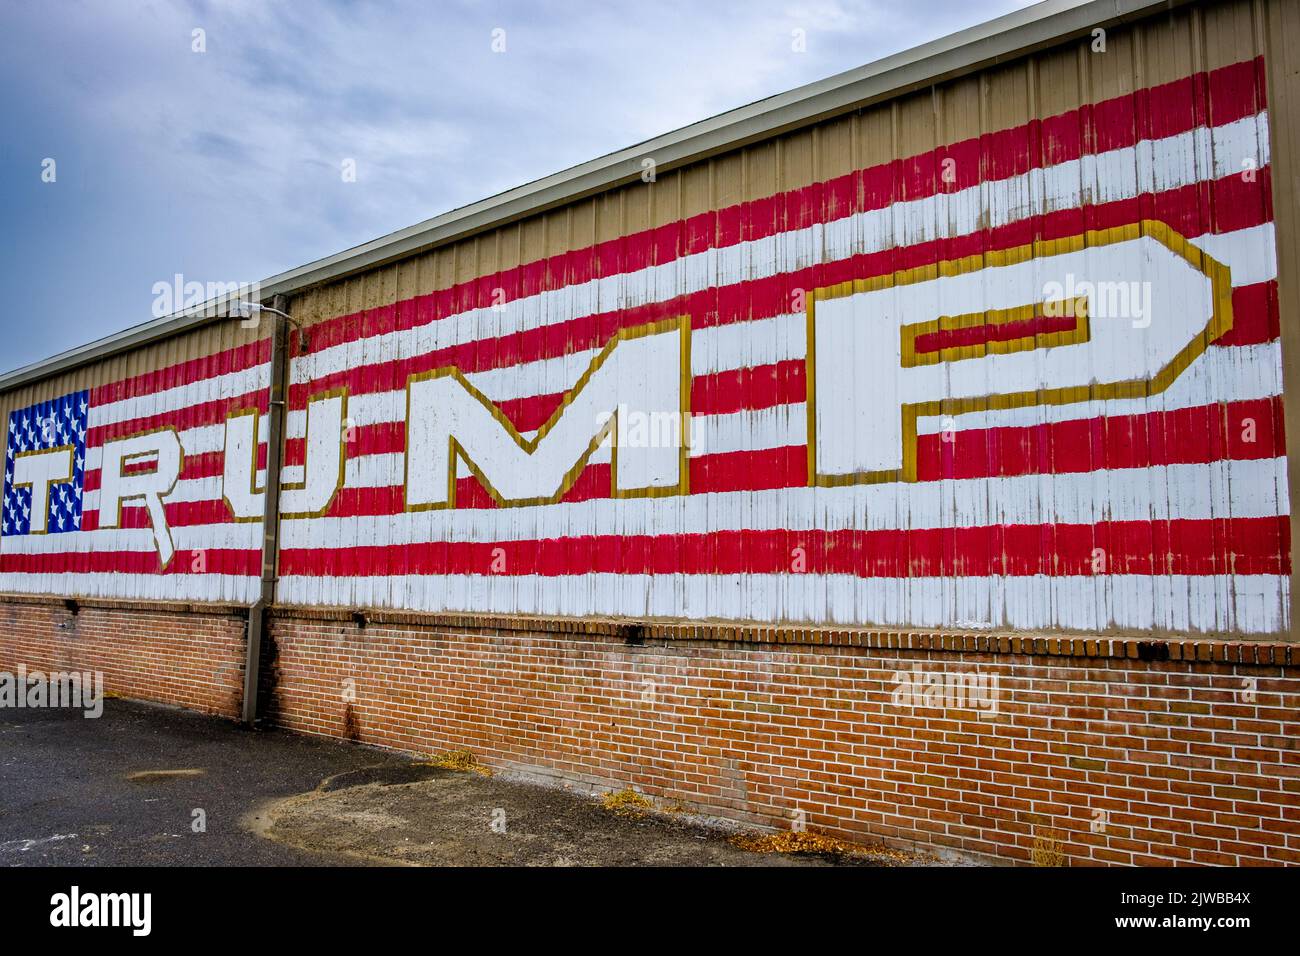 A large Donald Trump sign painted on the side of a building near Selinsgrove, PA, USA. Stock Photo